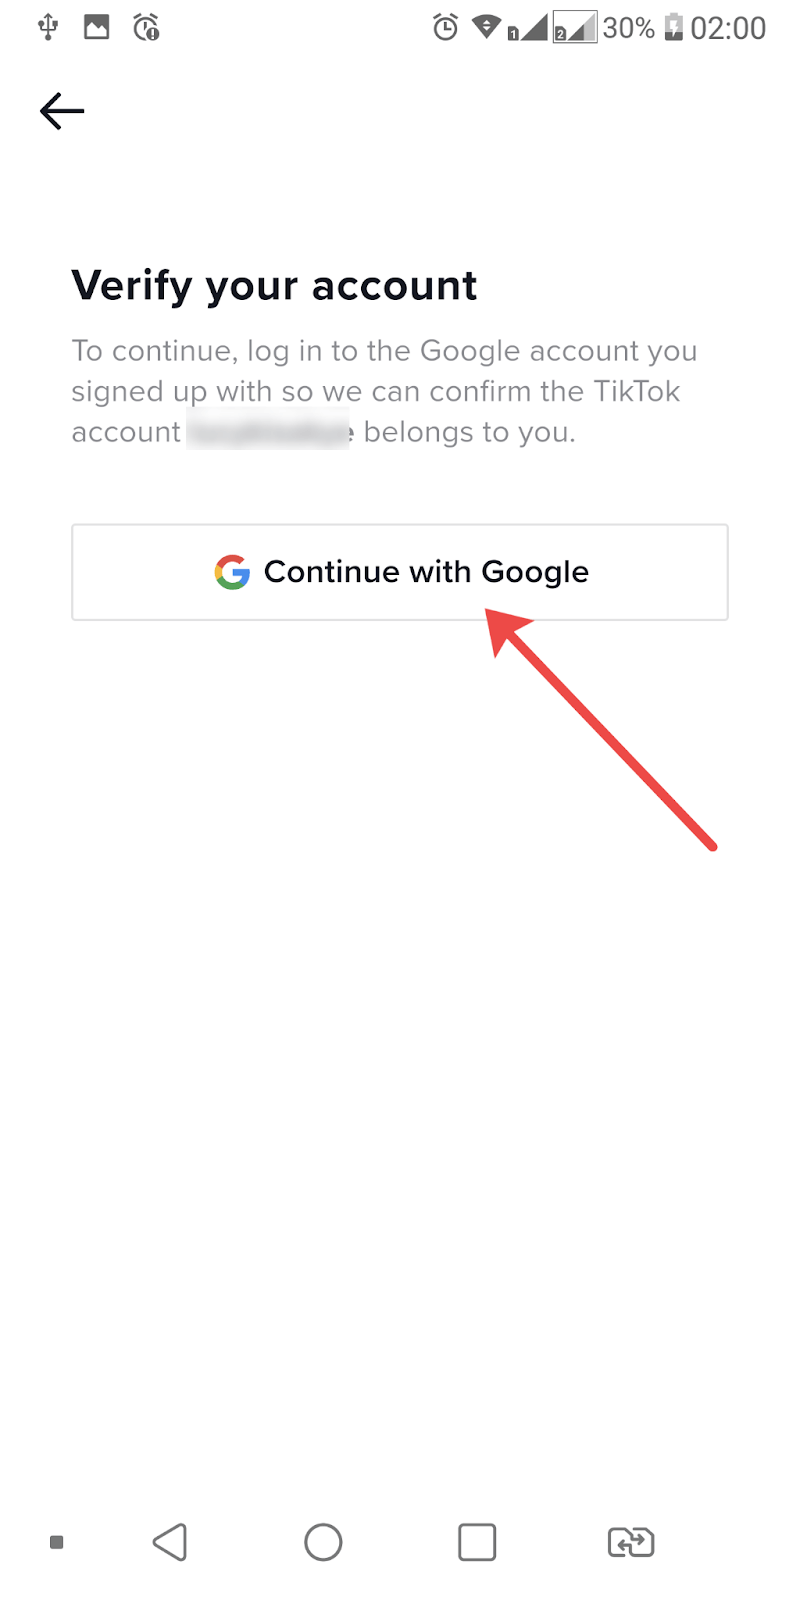 Click on continue with Google